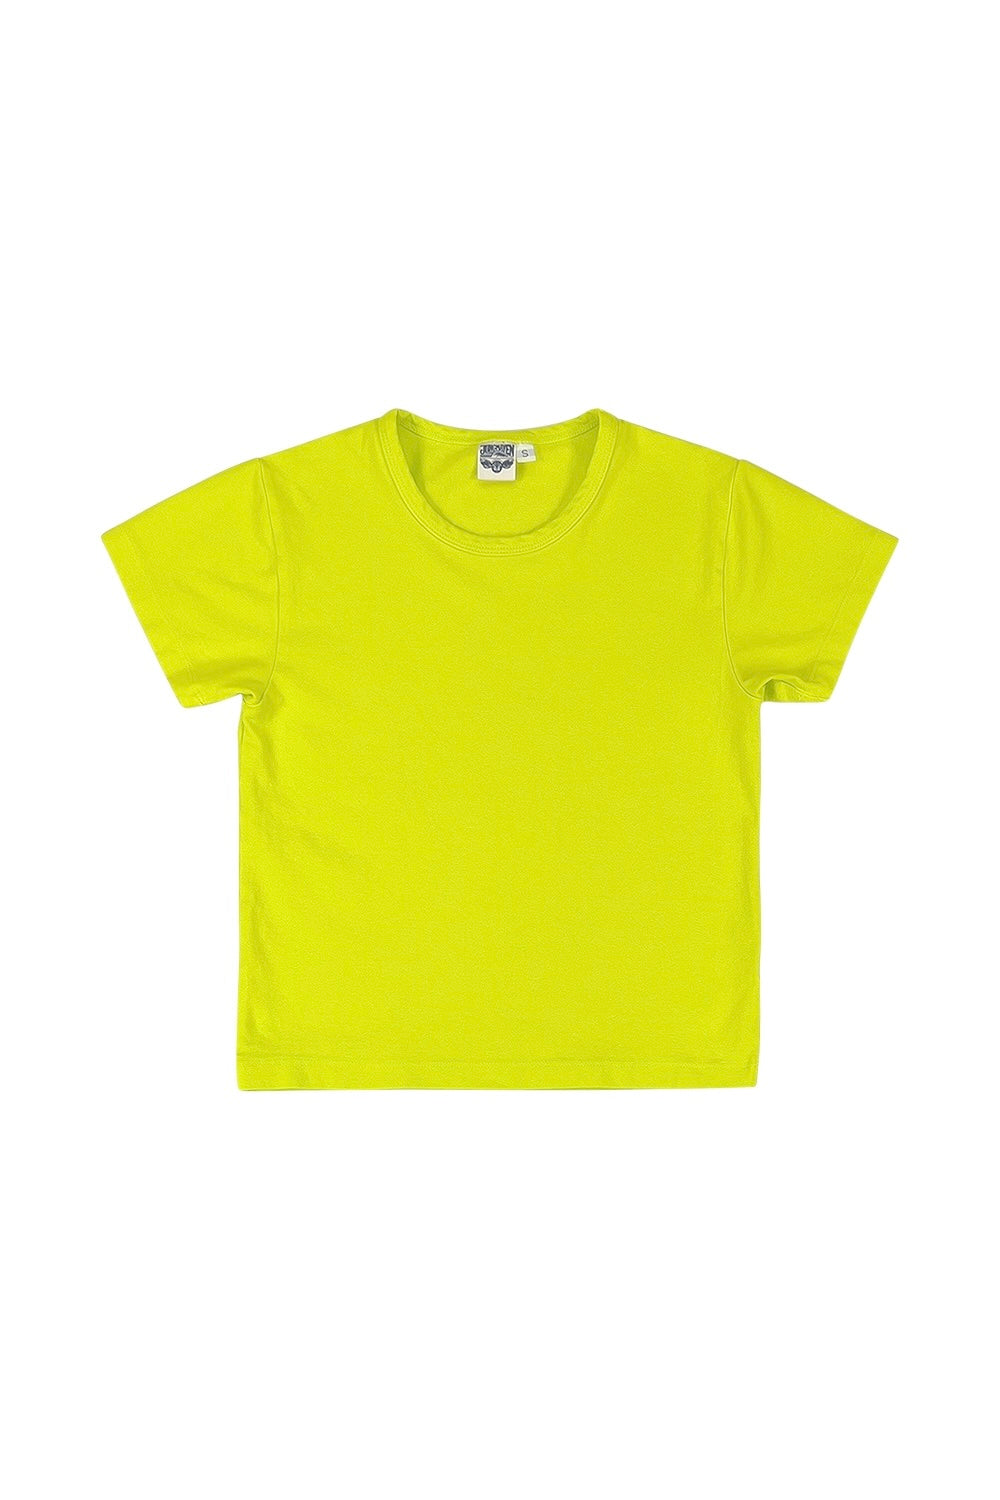 Tiny Tee | Jungmaven Hemp Clothing & Accessories / Color: Limelight